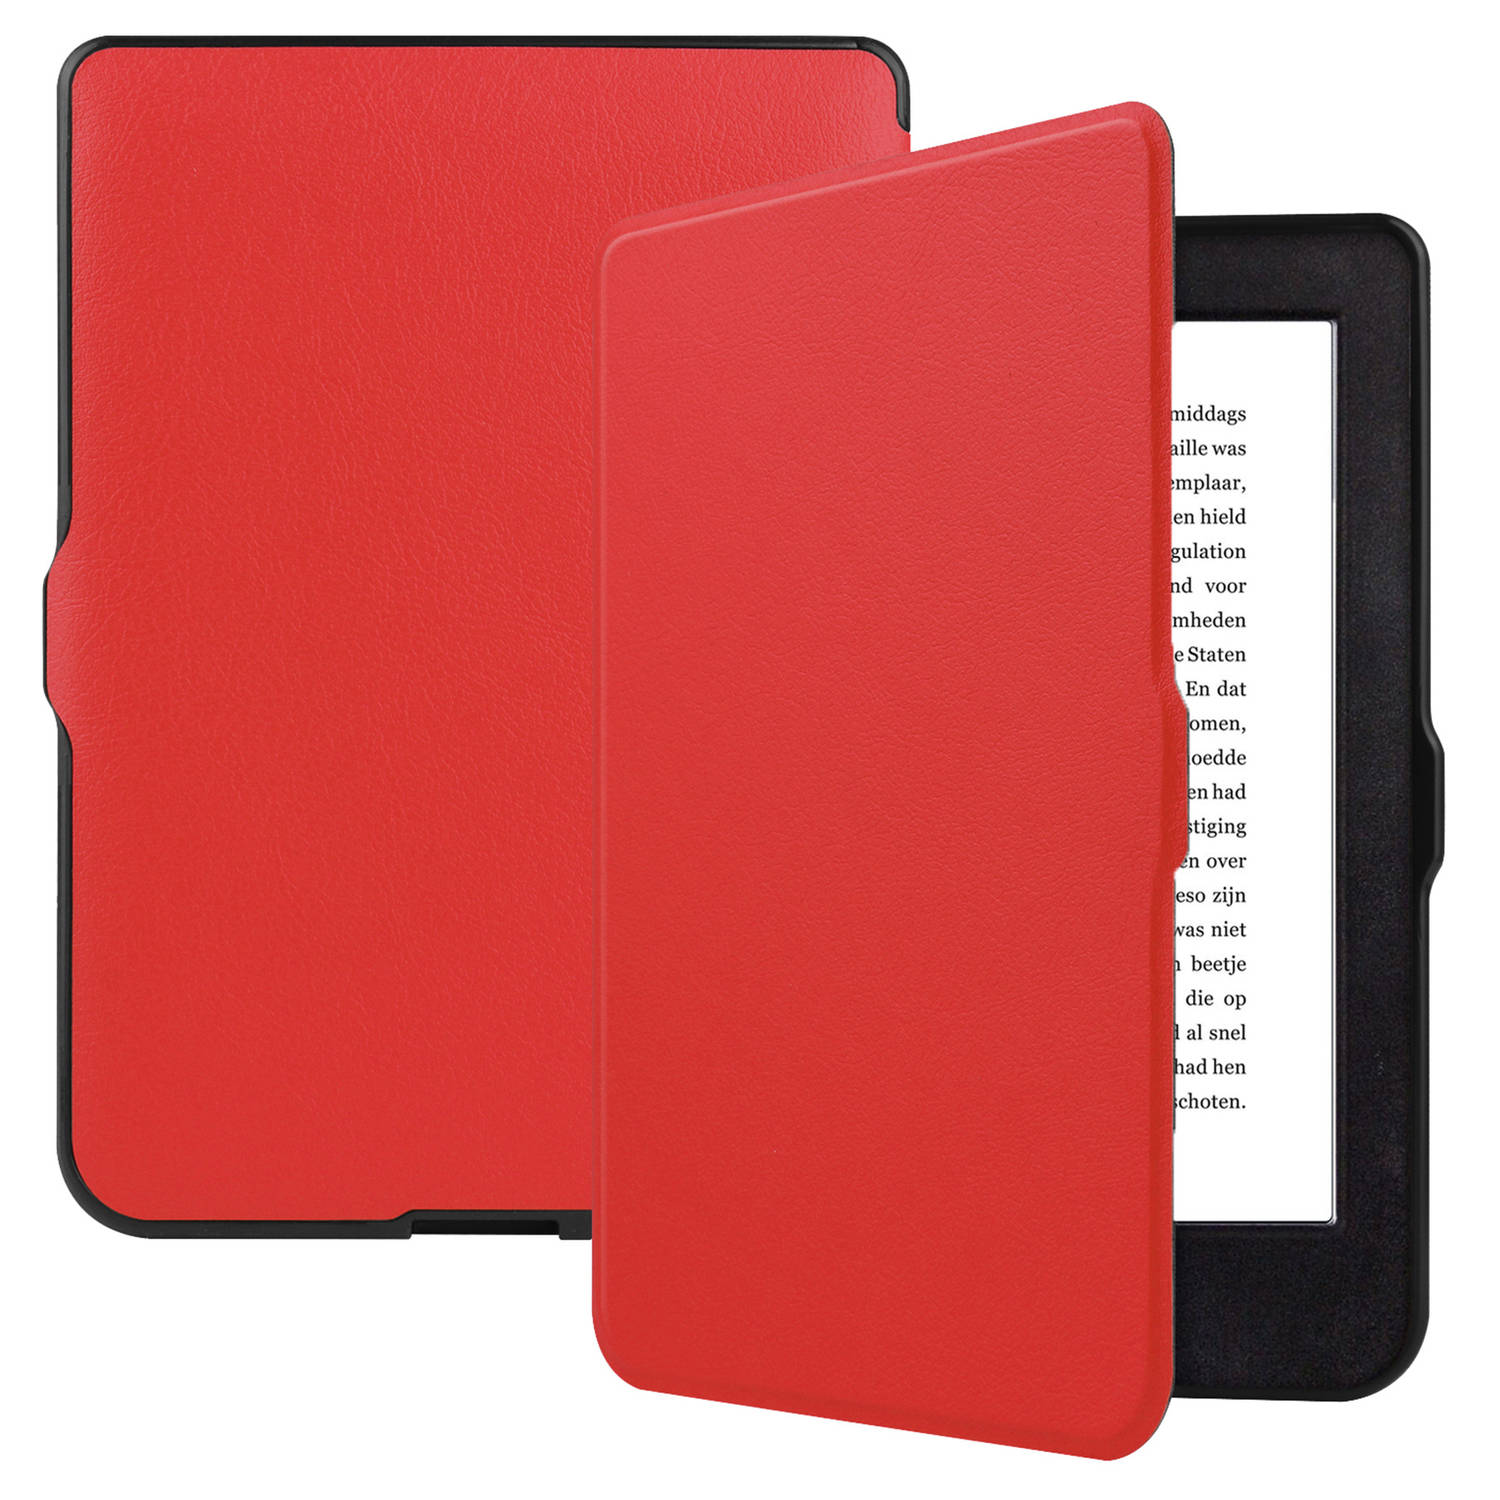 Basey Kobo Nia Hoesje Bookcase Cover Hoes - Kobo Nia Case Cover Hoes - Rood